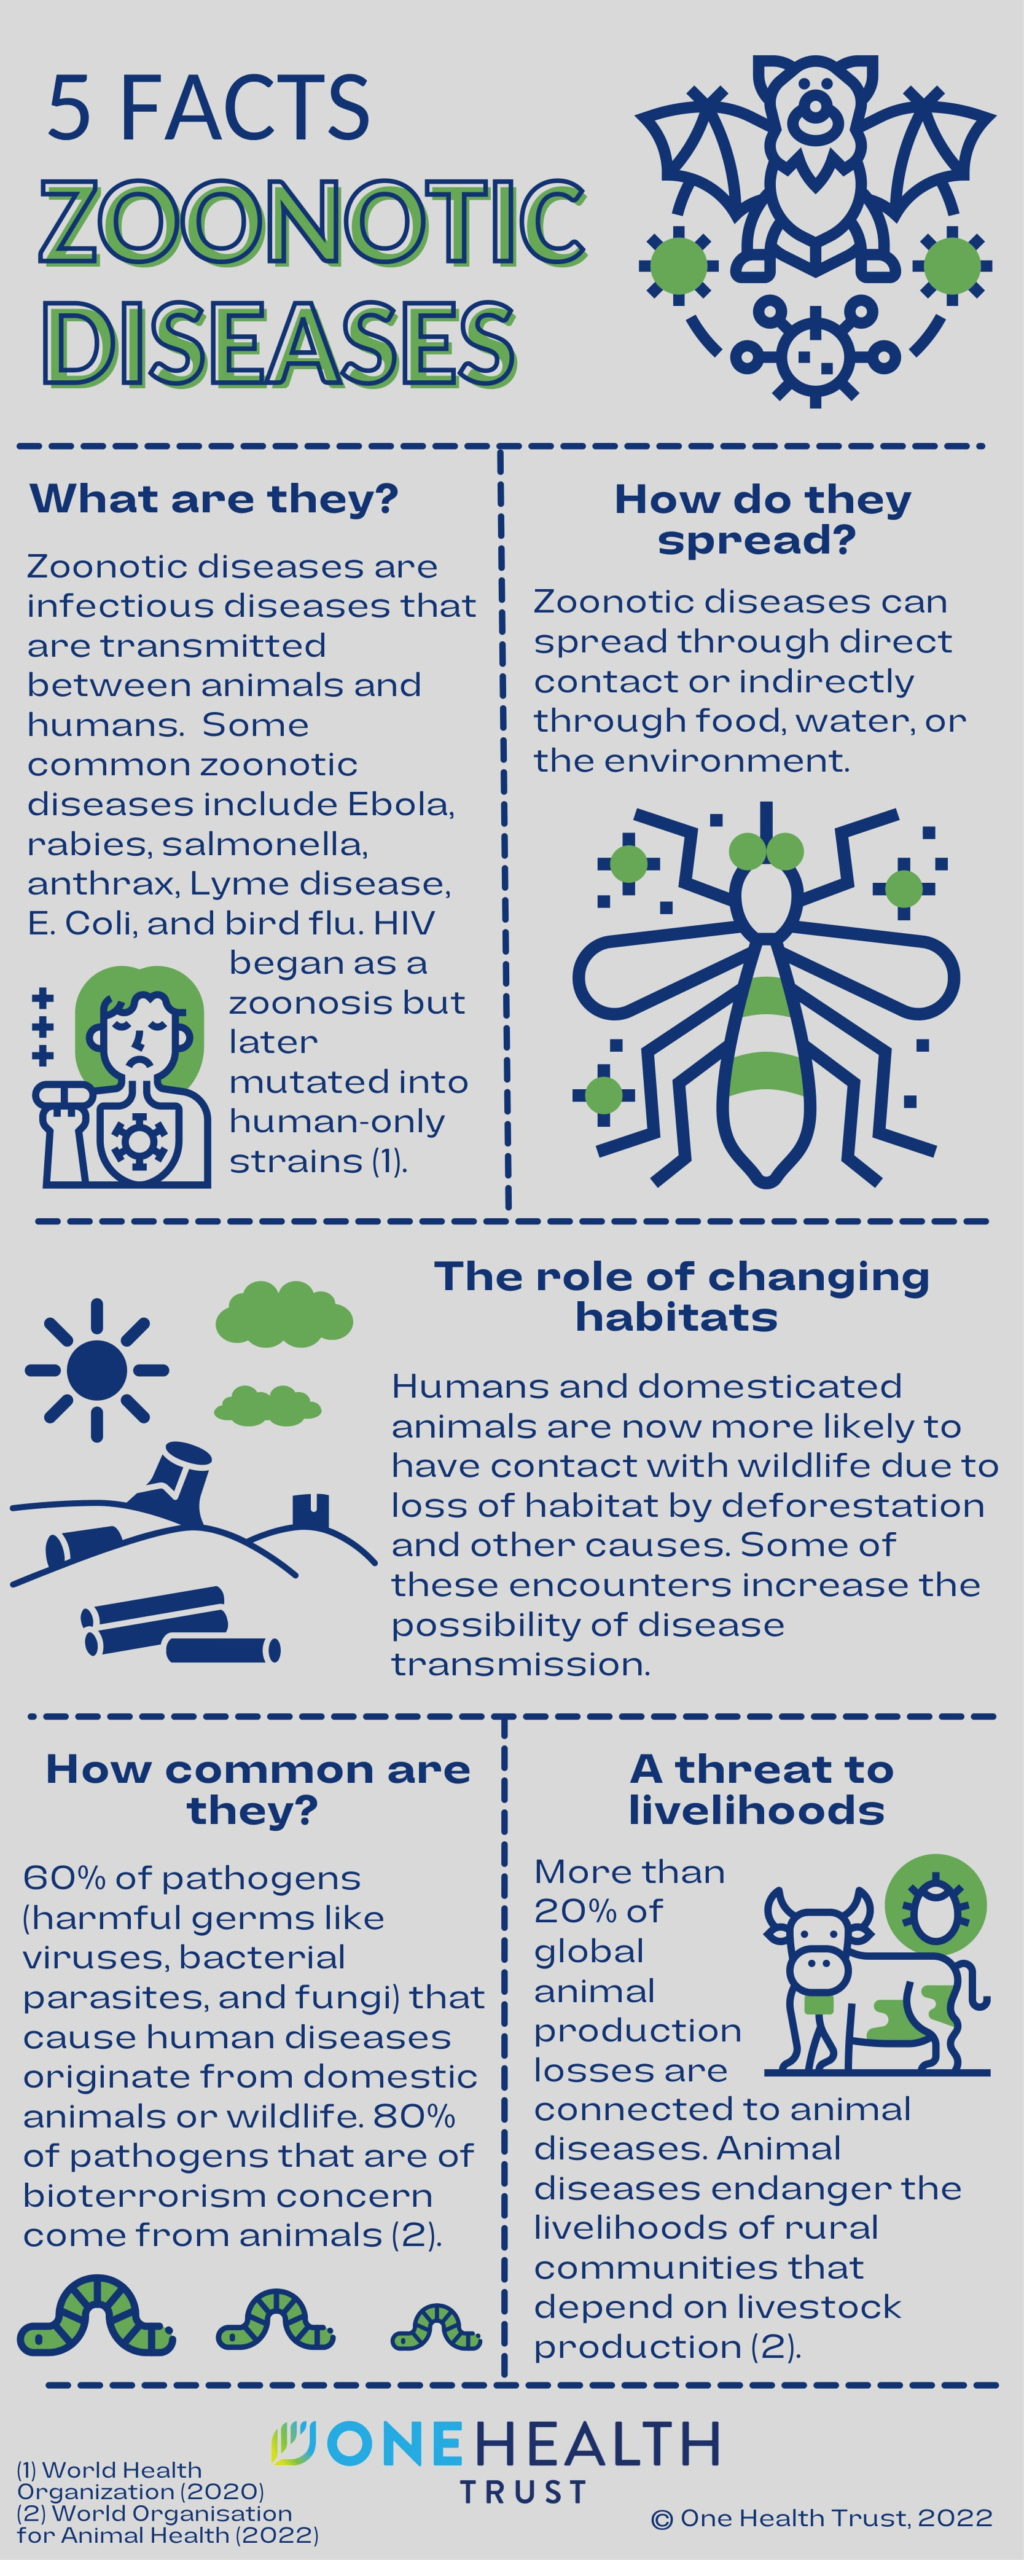 Zoonotic diseases: What they are, how they spread, how common they are, and where they come from.